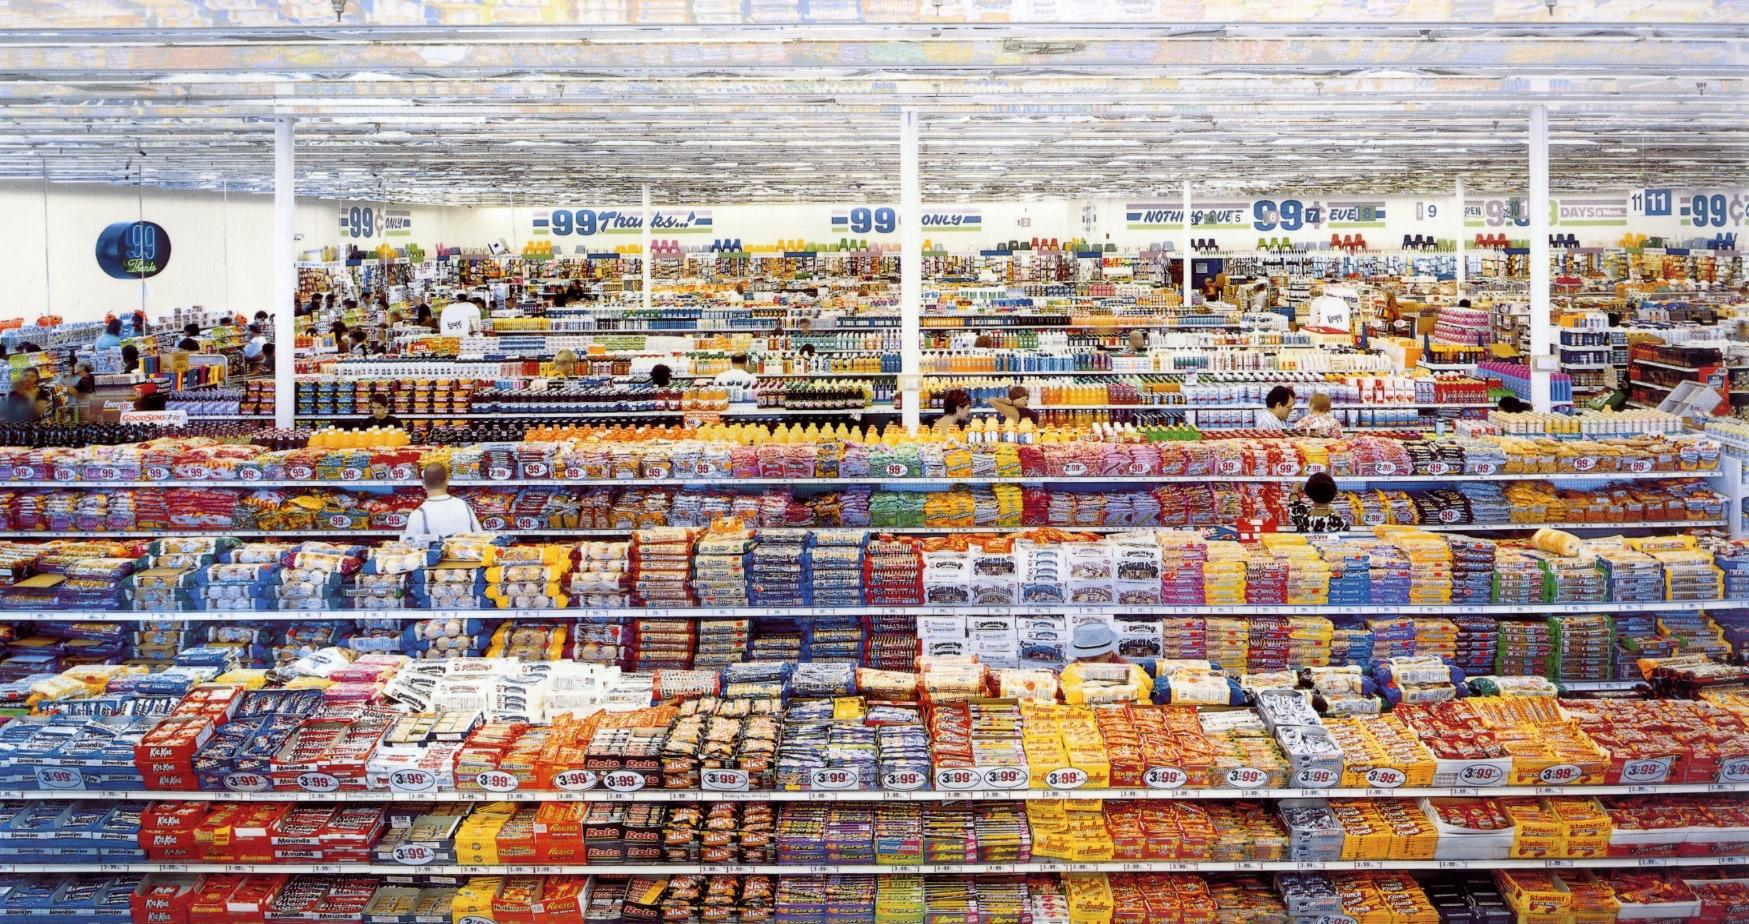 07Andreas Gursky